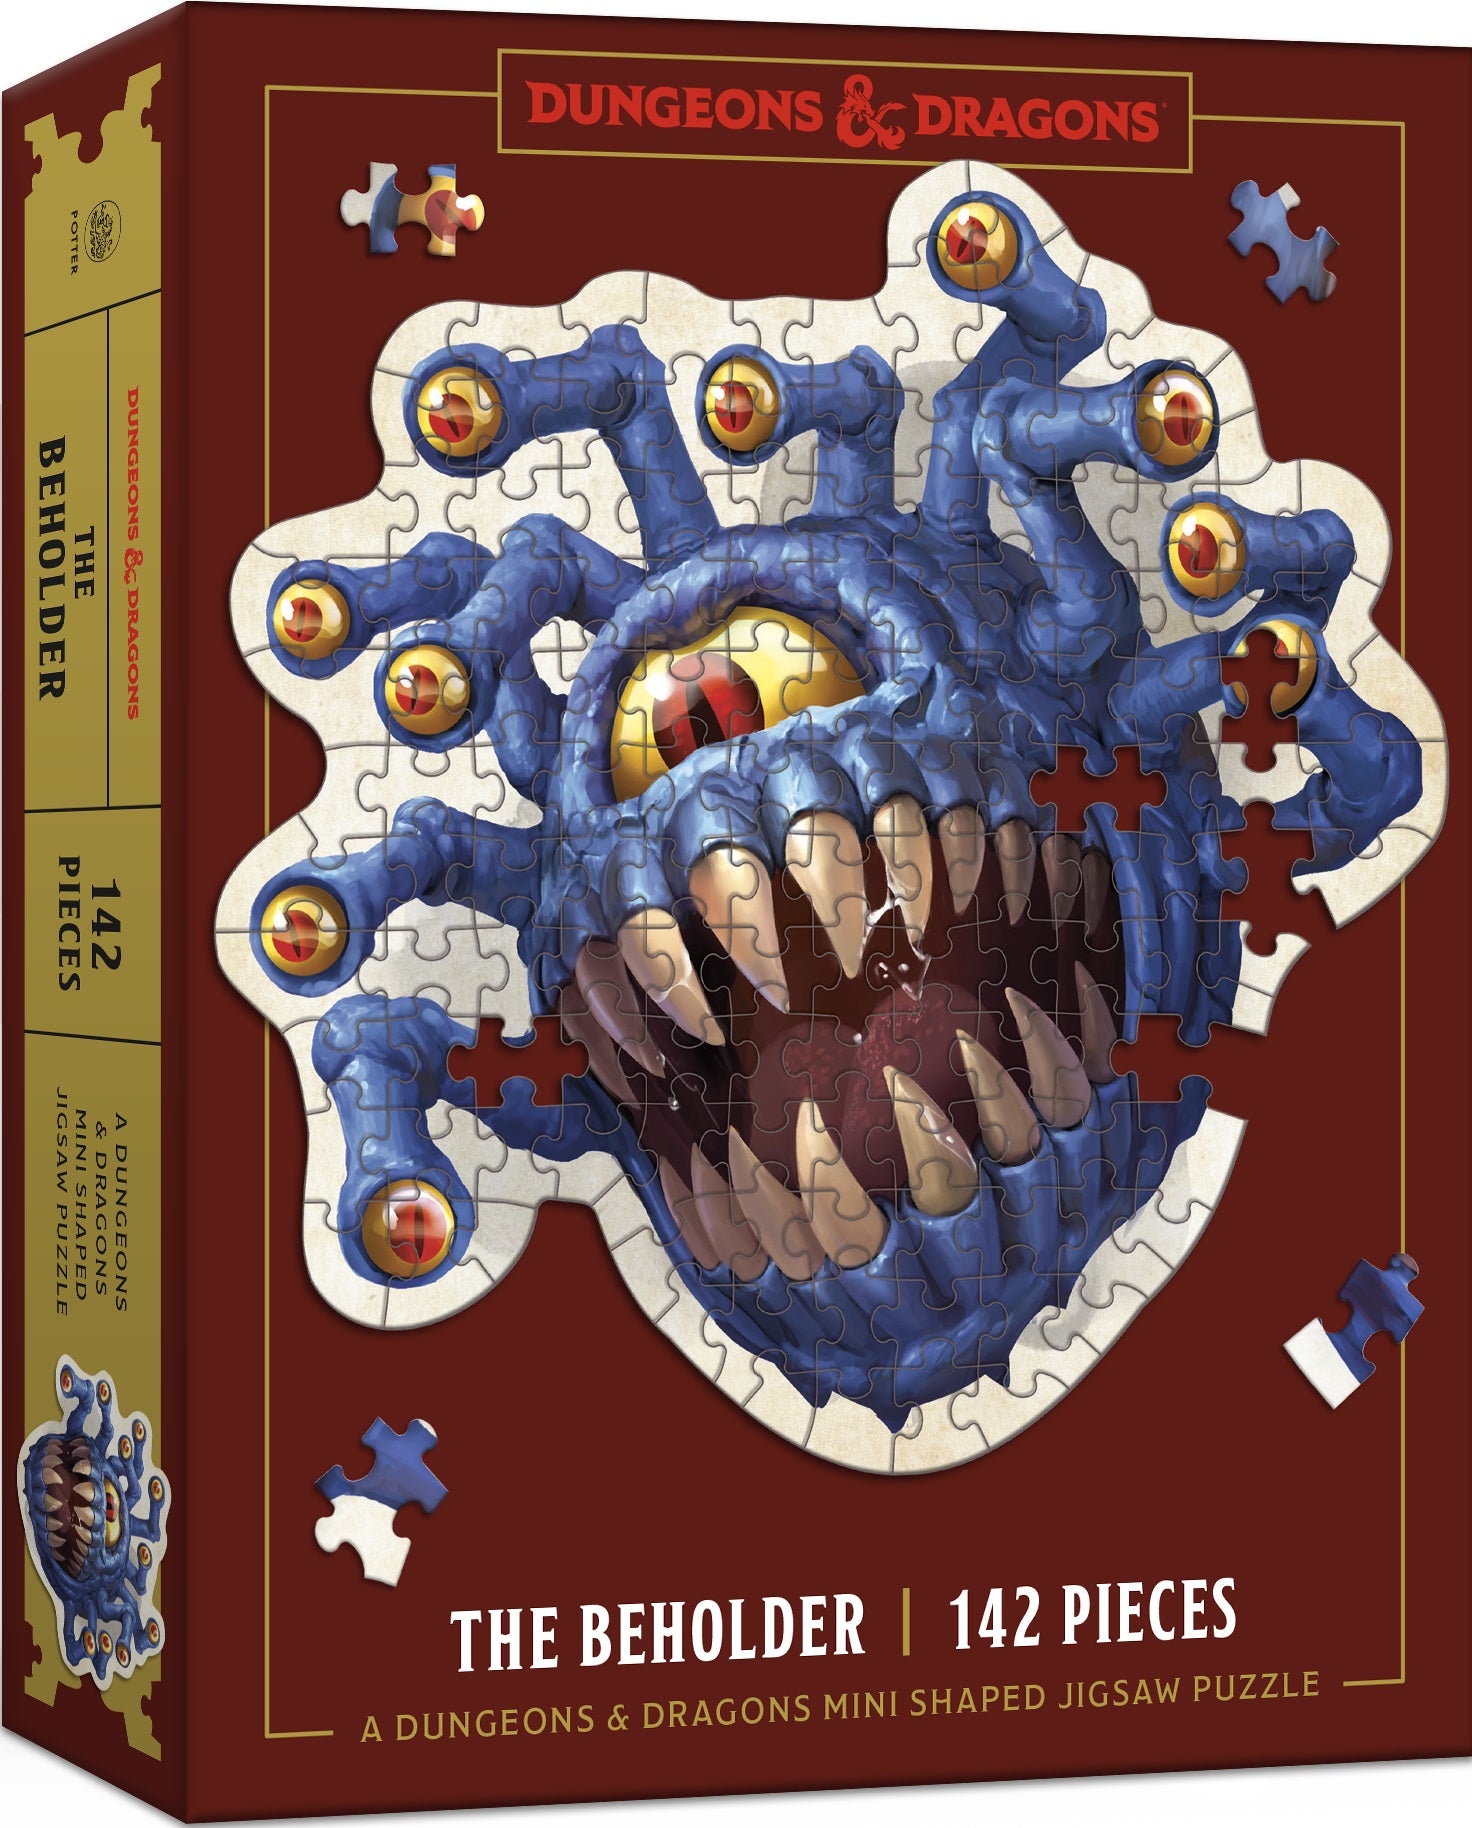 DND MINI SHAPED JIGSAW PUZZLE THE BEHOLDER EDITION